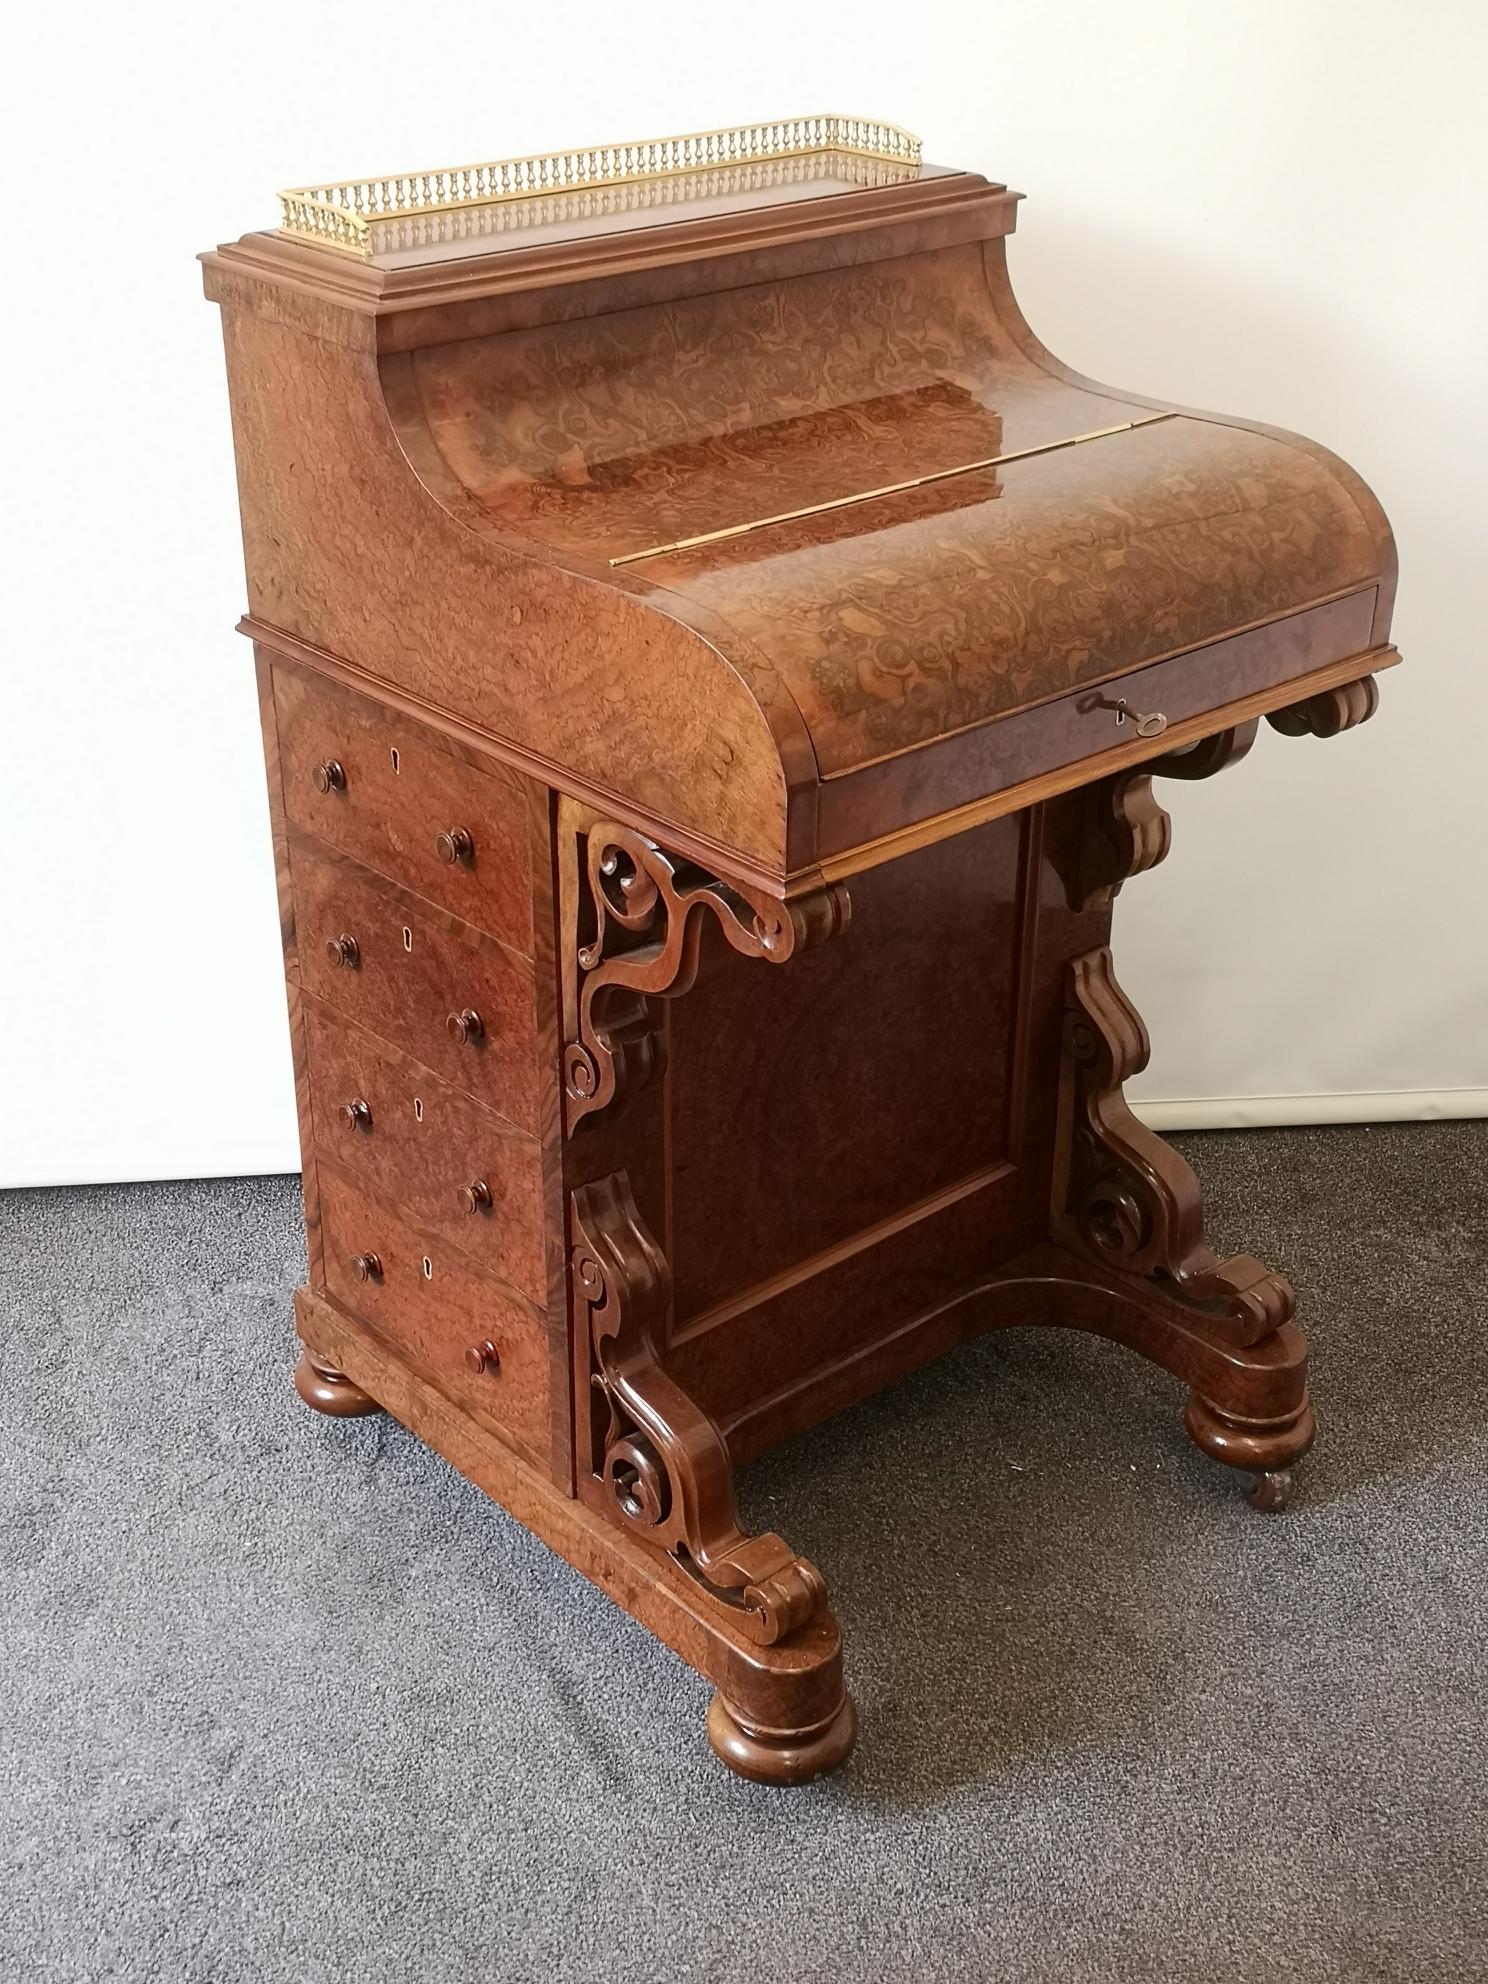 A good quality Victorian piano top davenport with well figured burr walnut. The pop up top with fretwork and a letter holders inside, topped with a brass gallery. Sliding easel backed leather writing surface, inkwells and two drawers. Four false and